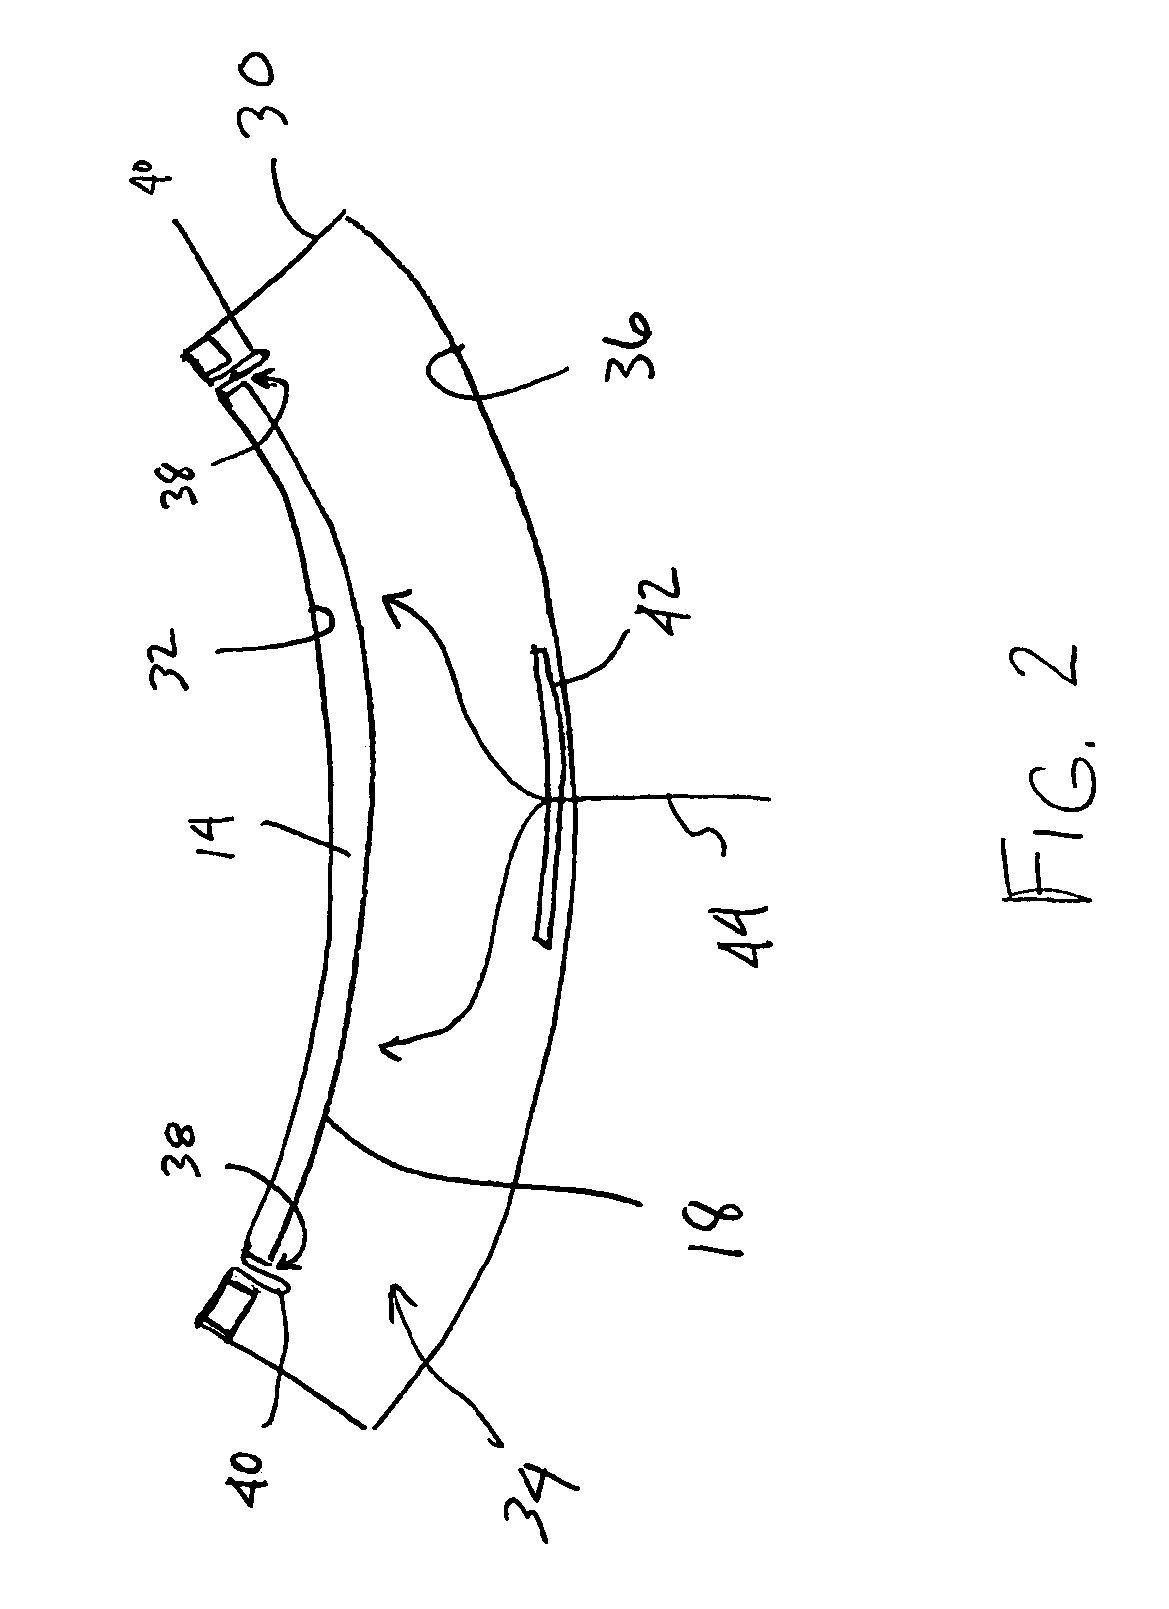 Contoured capacitive touch control panel